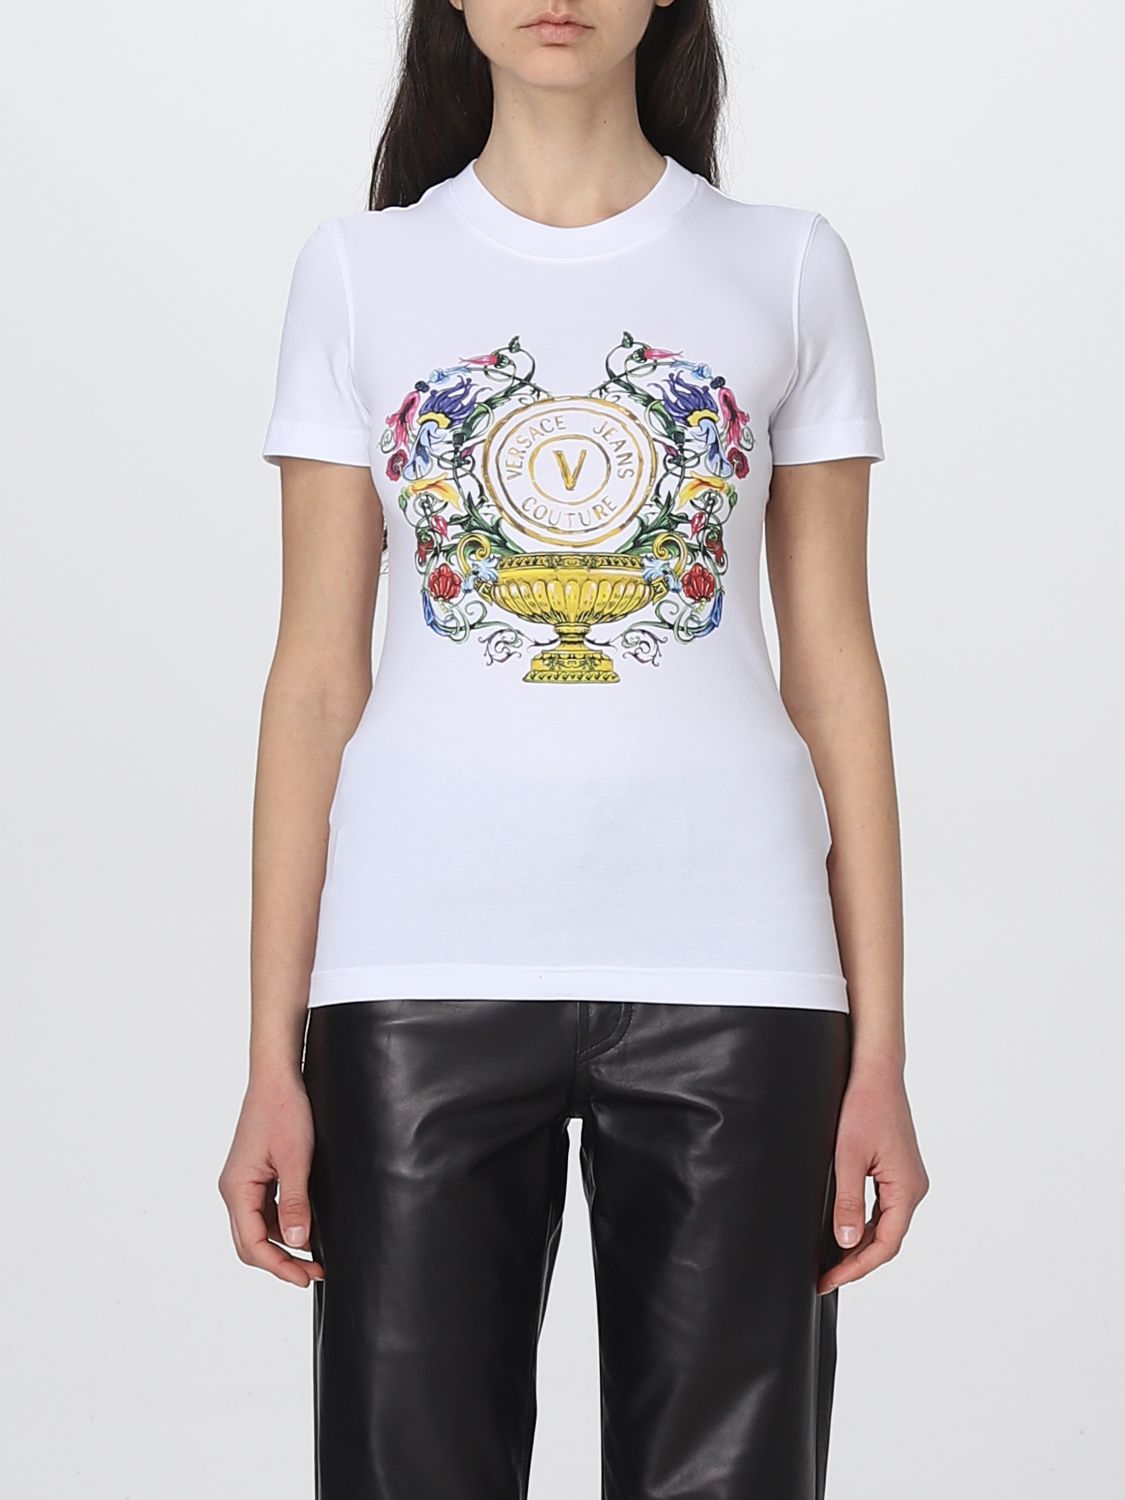 Versace Jeans Couture T-shirt  Damen Farbe Weiss In White